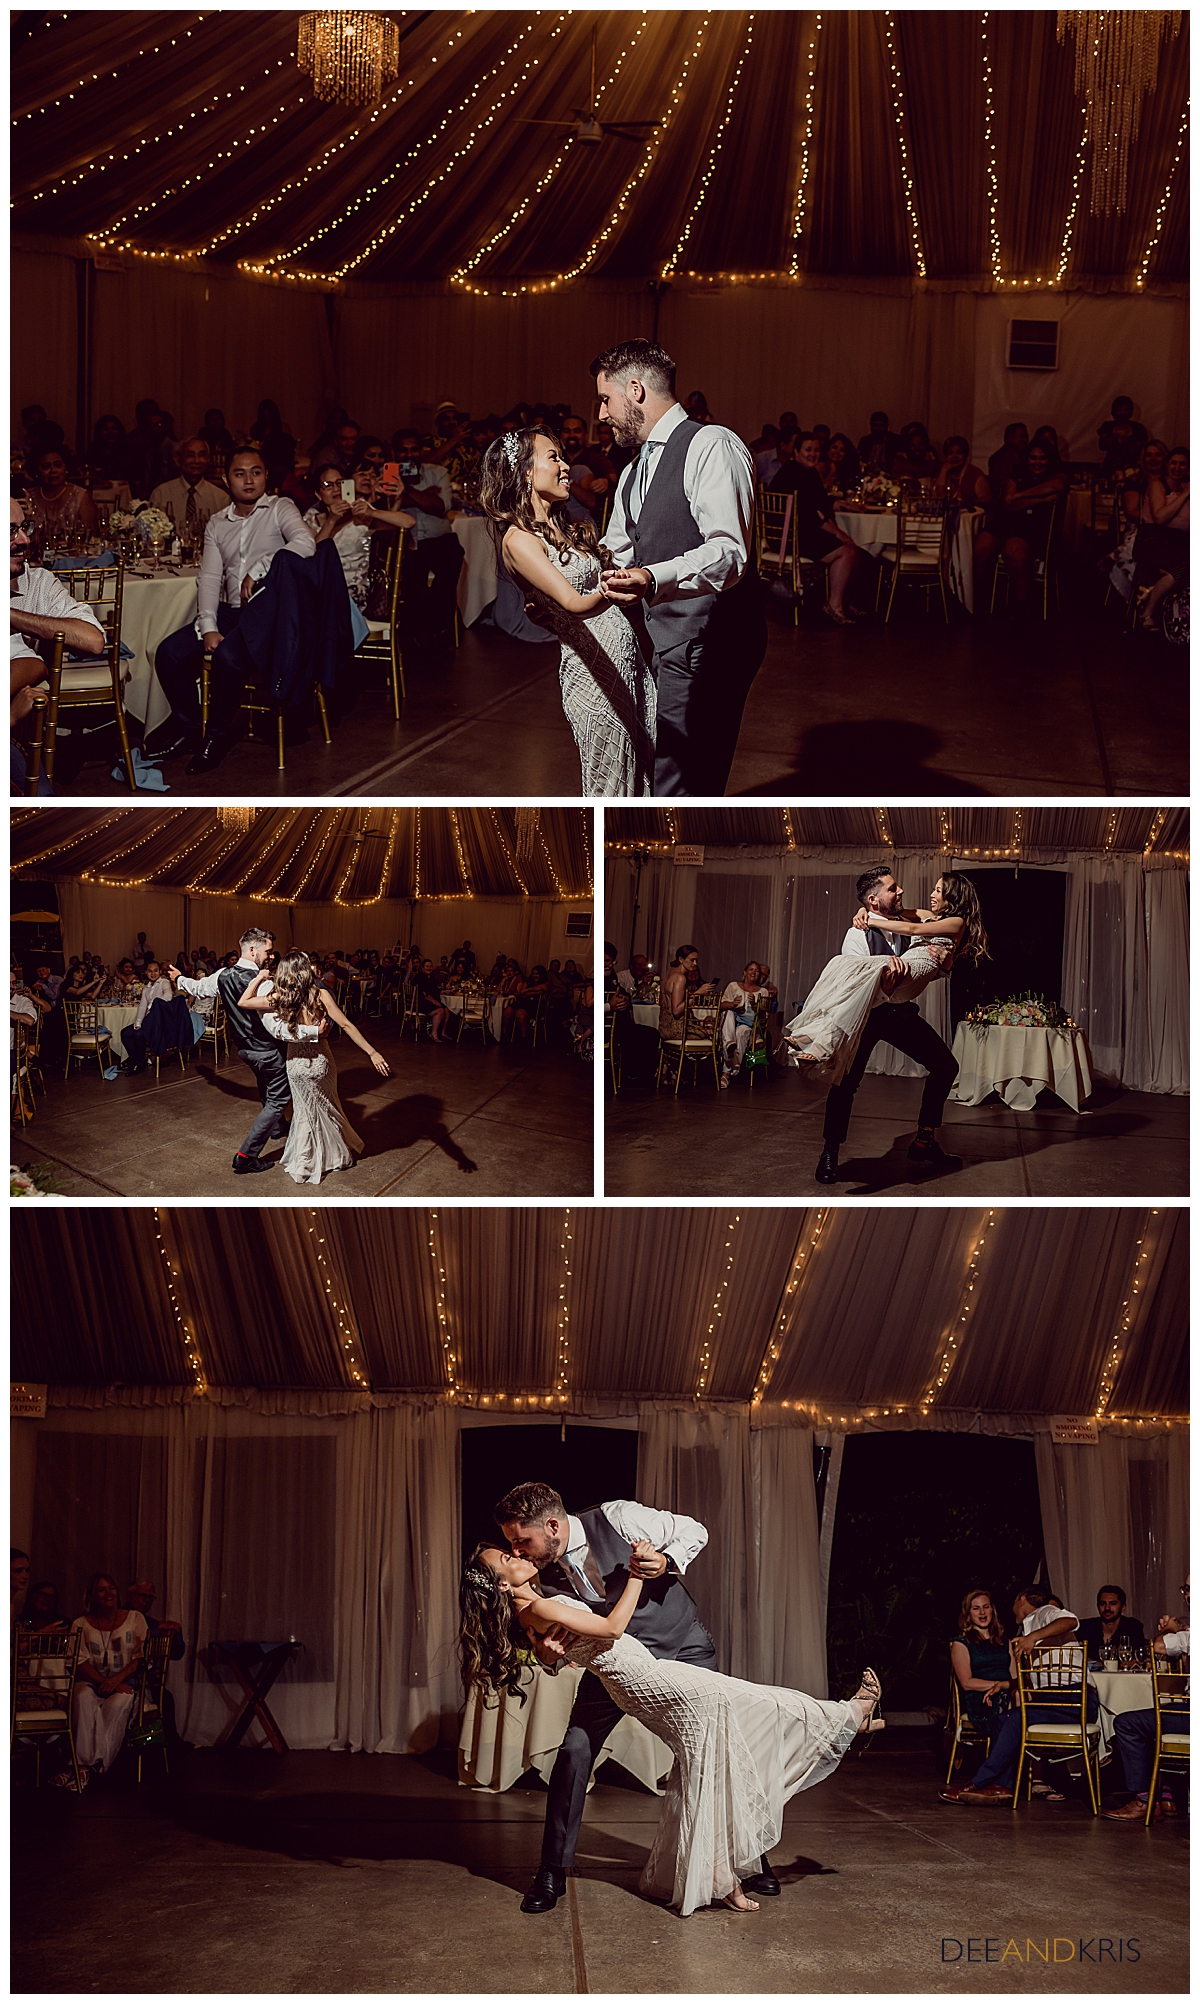 Five images of bride and groom dancing their first wedding dance as husband and wife.